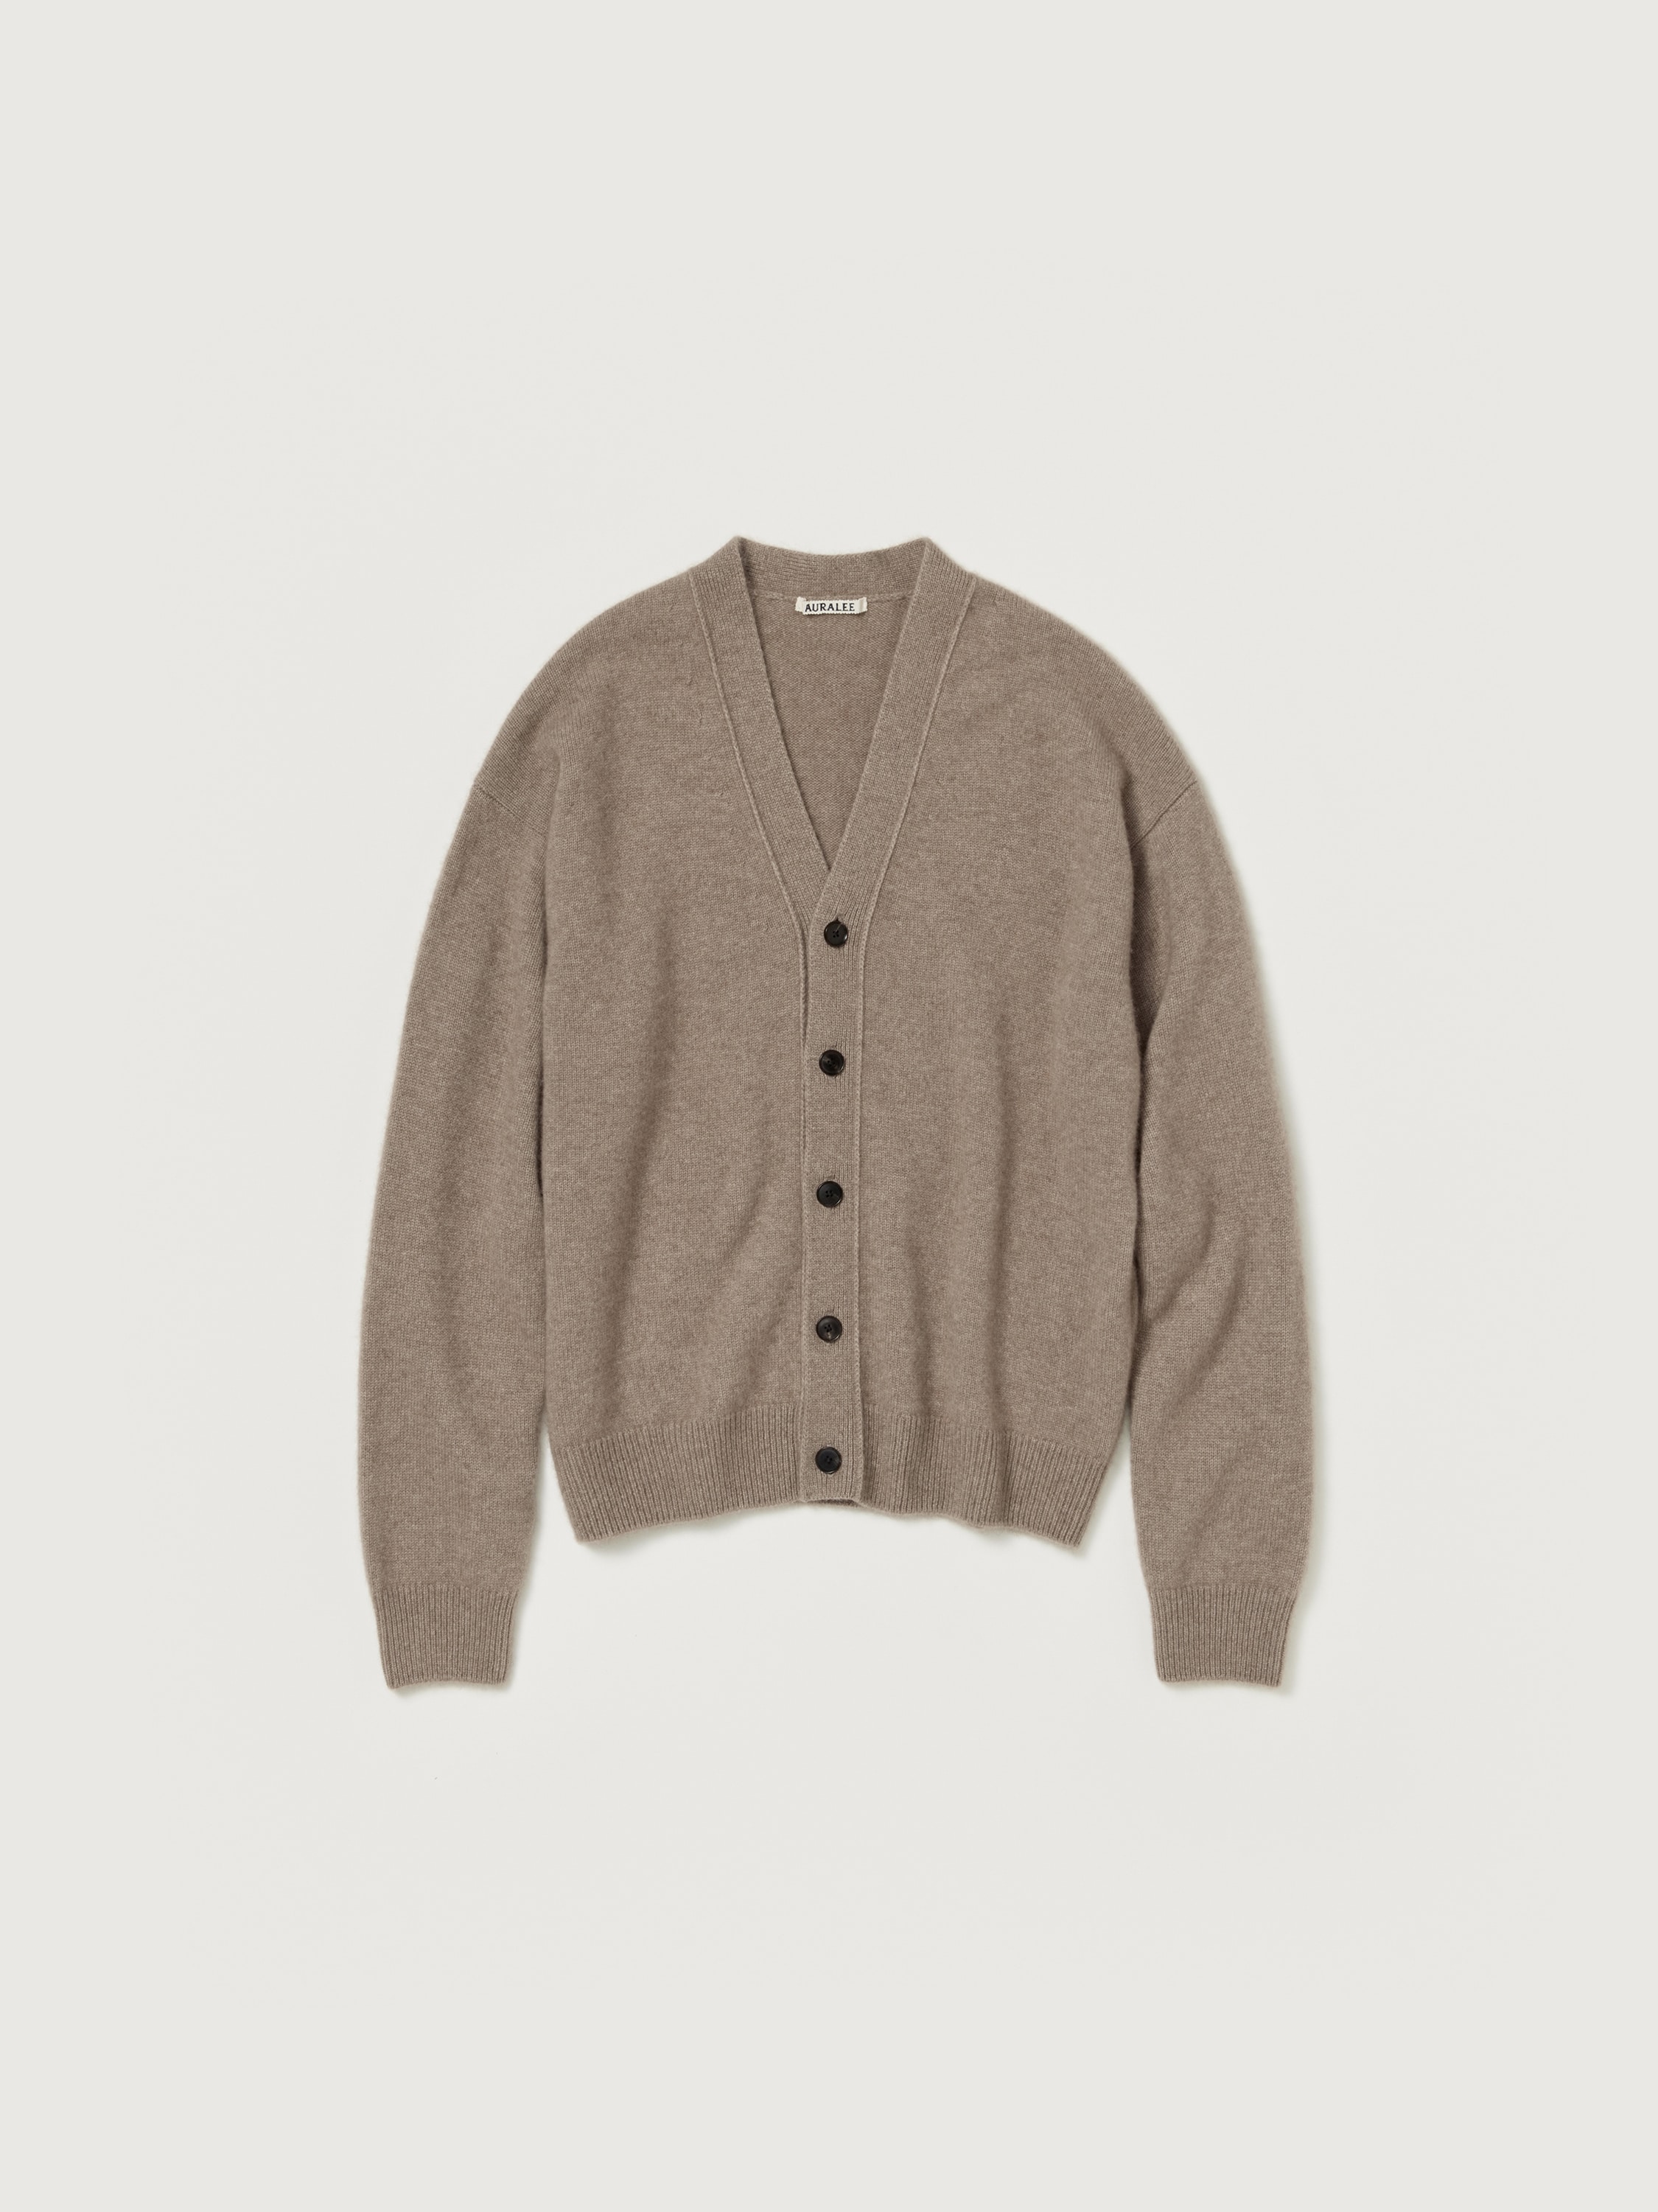 BABY CASHMERE KNIT CARDIGAN - AURALEE Official Website